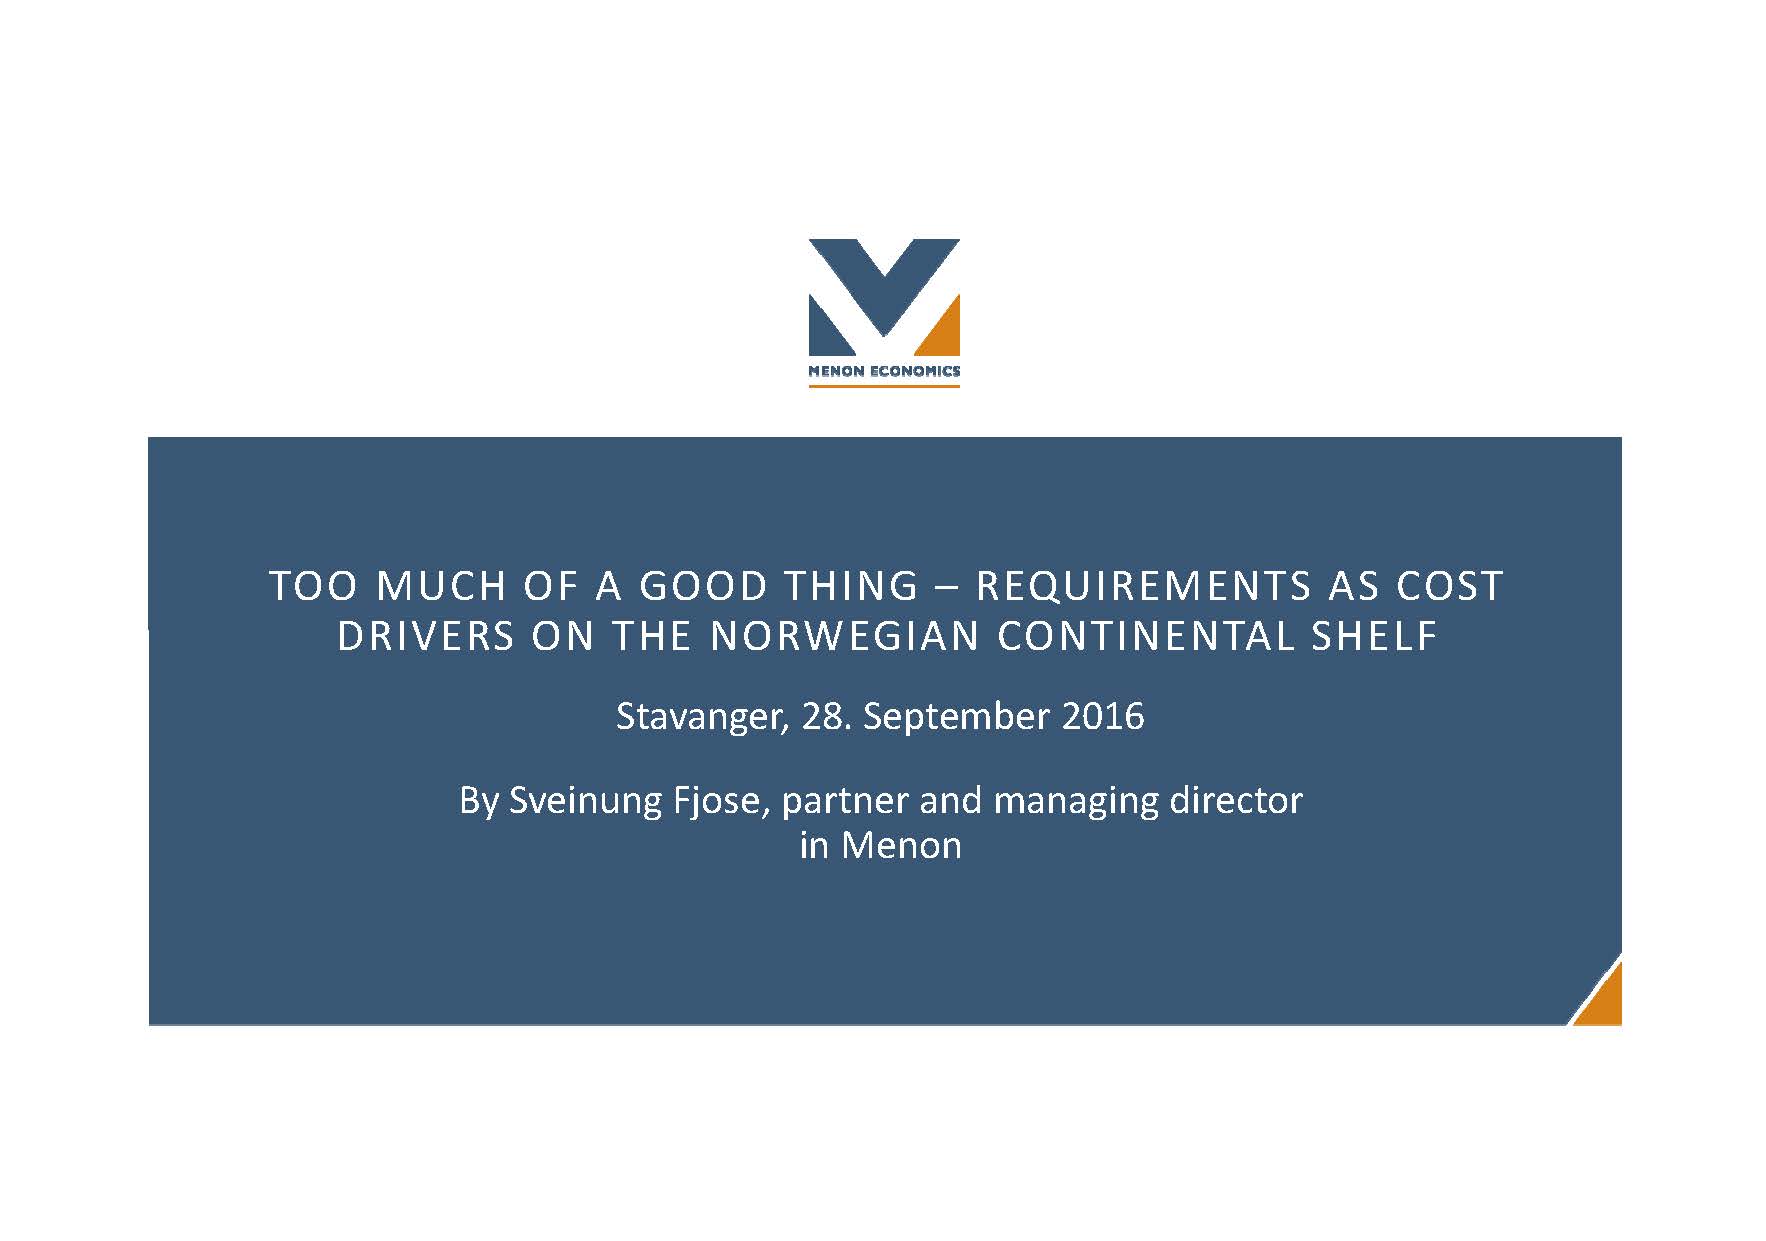 Requirements as cost drivers in the Norwegian petroleum industry – English summary